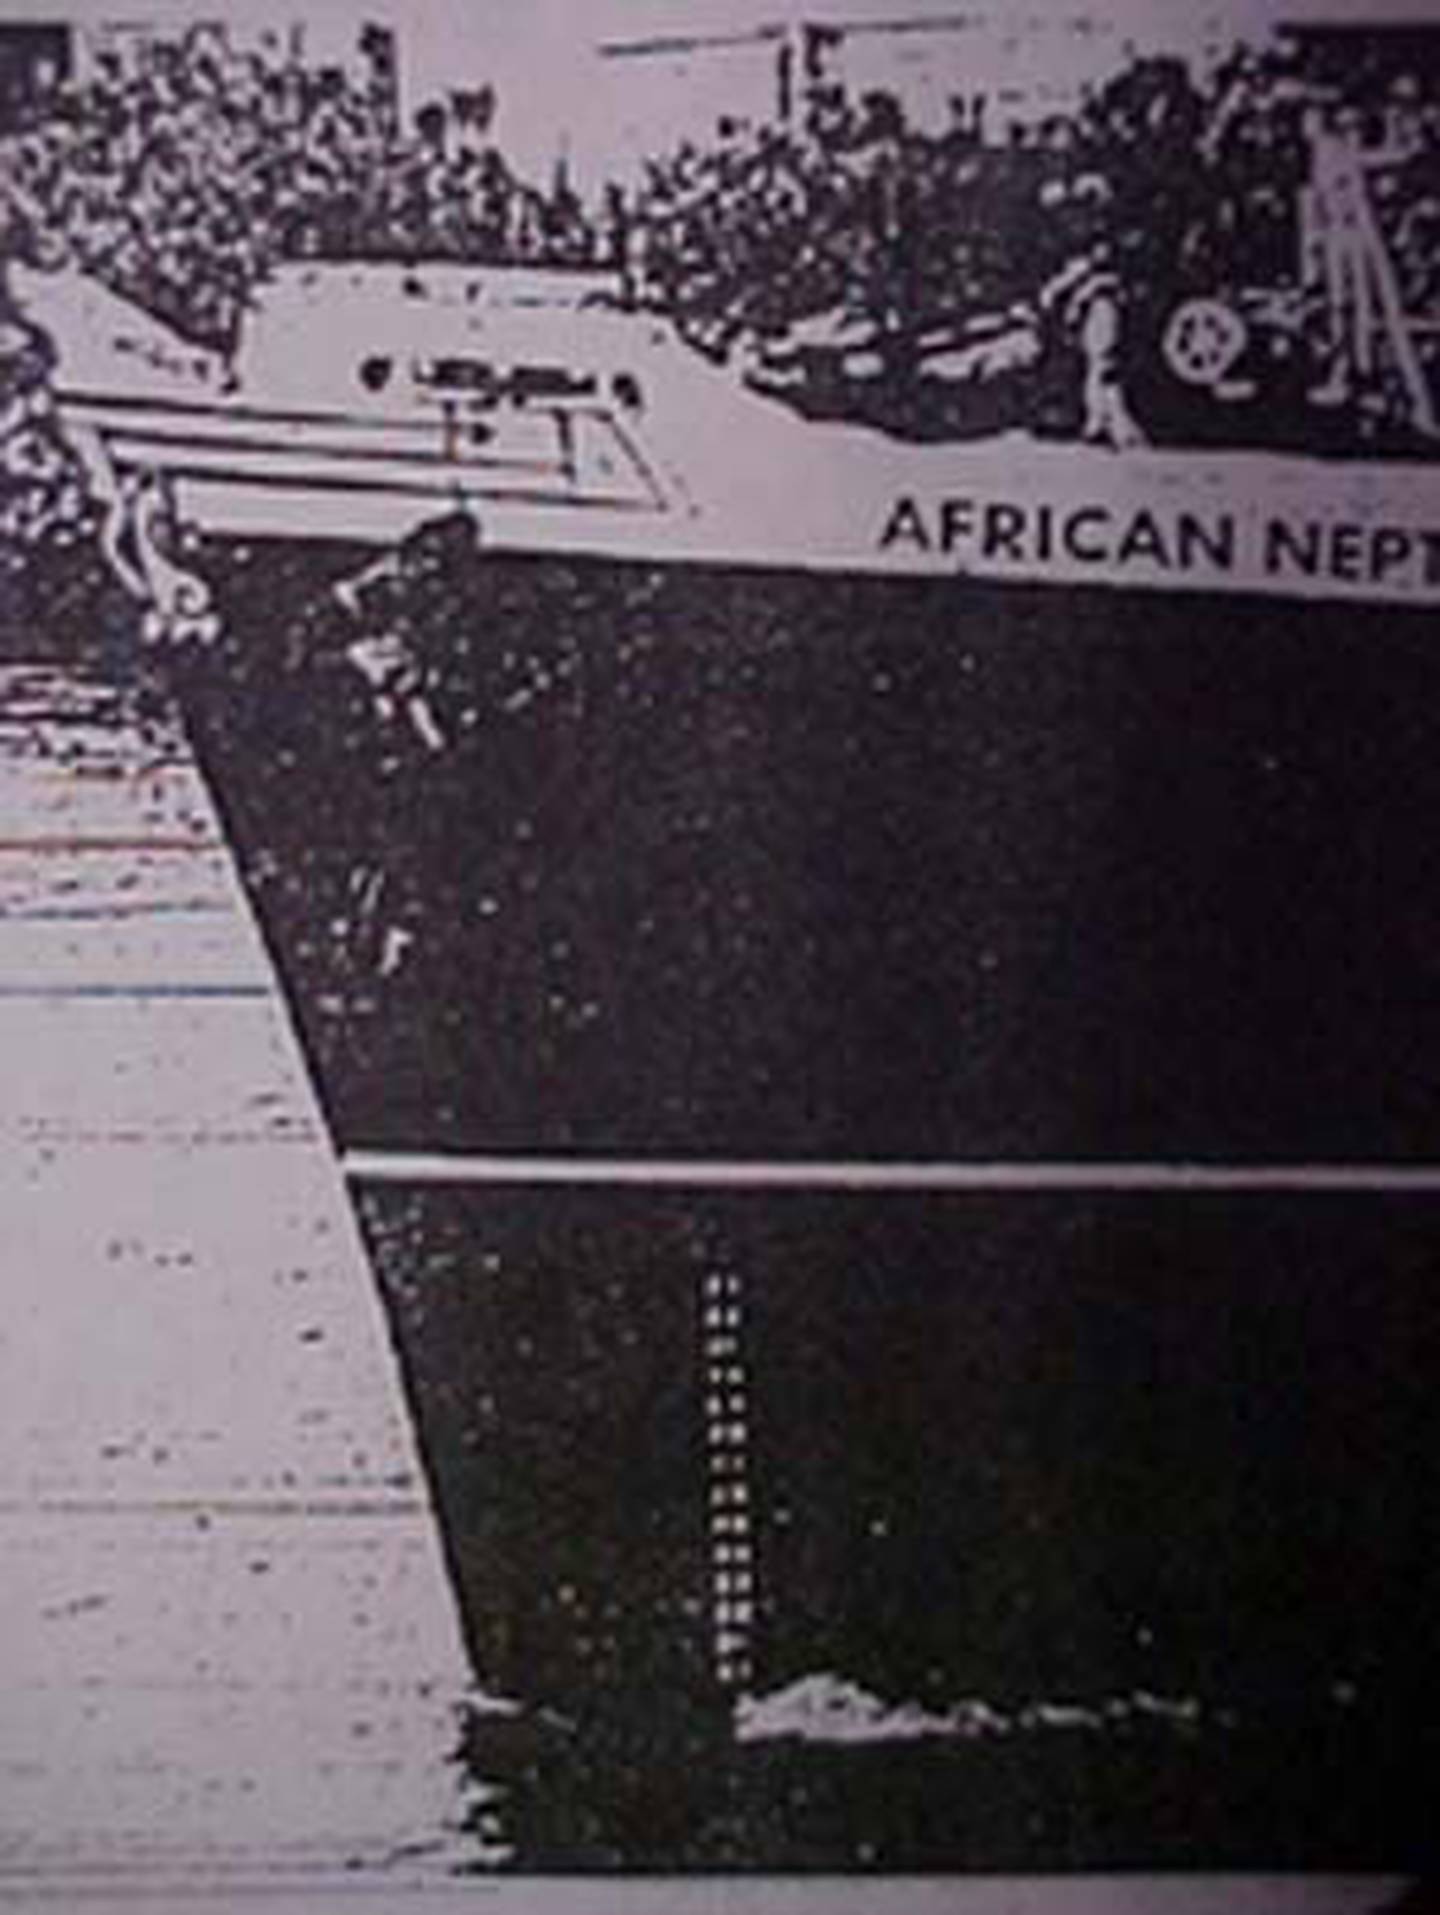 The cargo ship named 'African Neptune' crashed into the Sidney Lanier Bridge on Nov. 8, 1972.